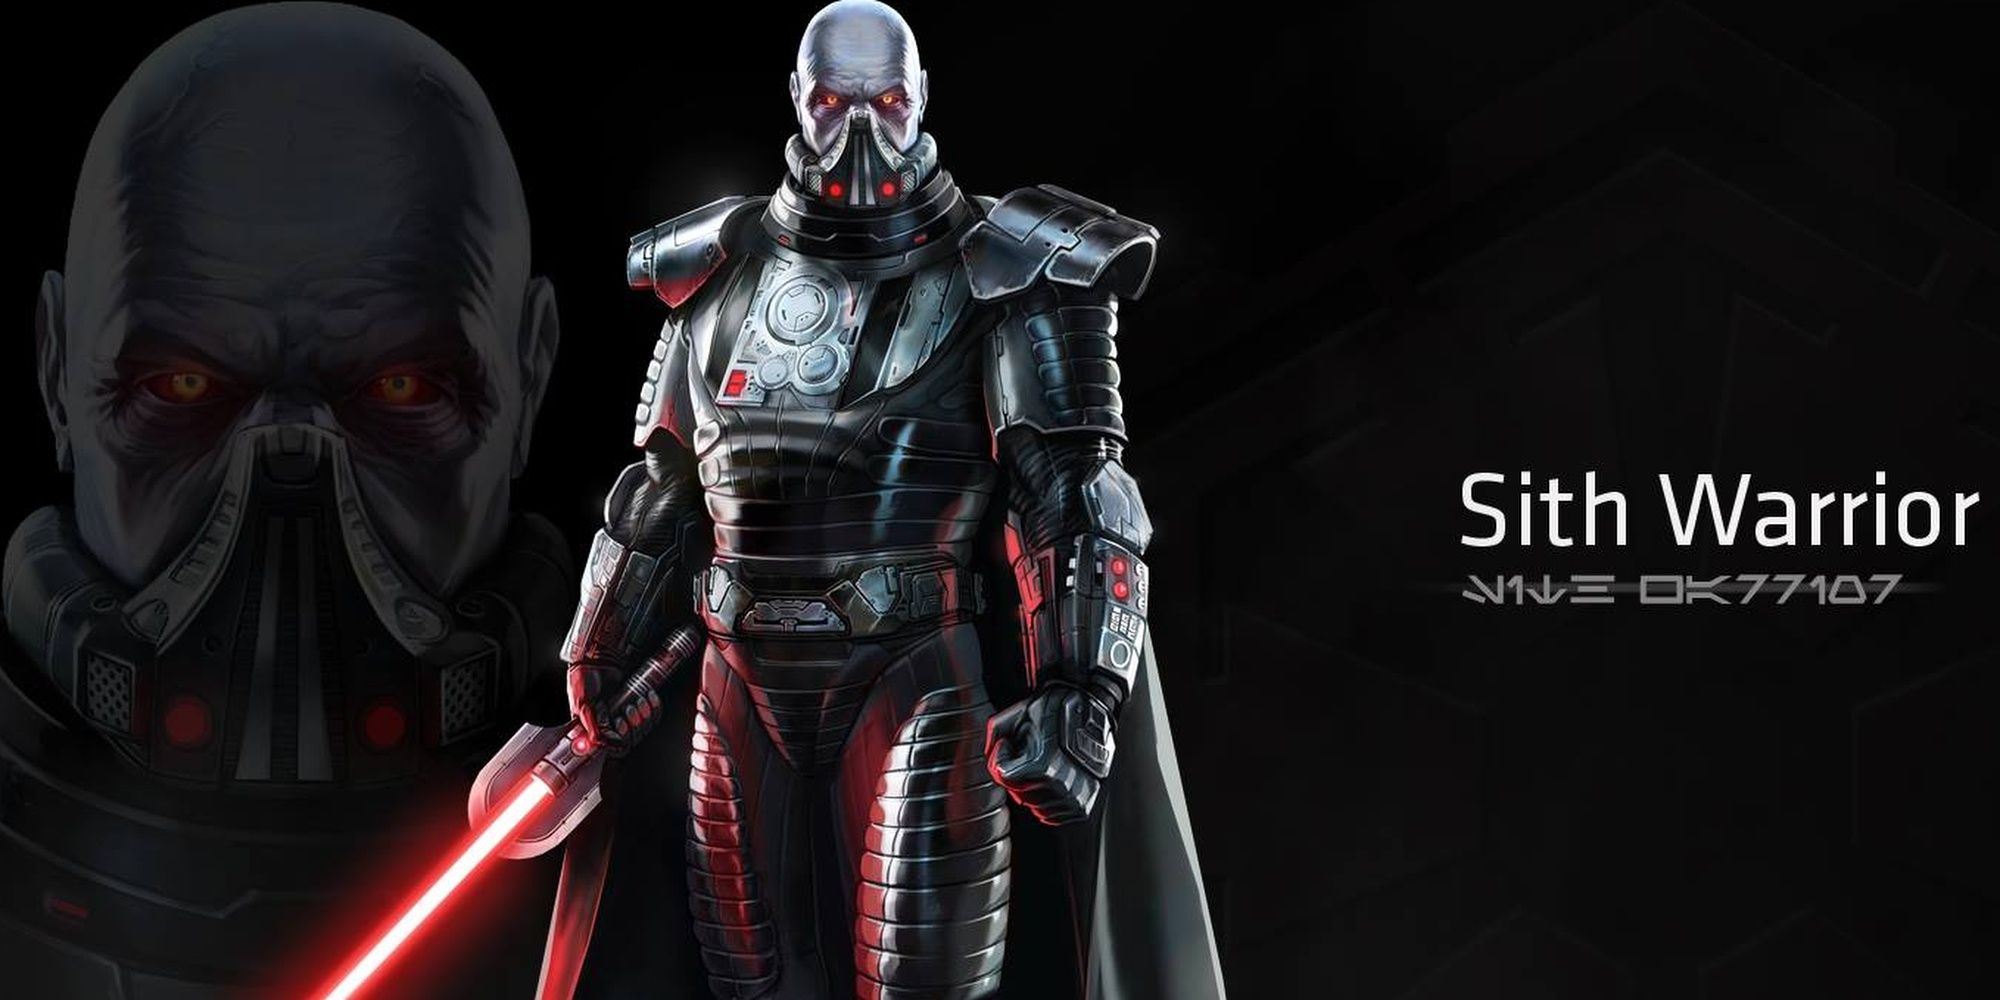 Sith Warrior Wallpaper from Star Wars: The Old Republic